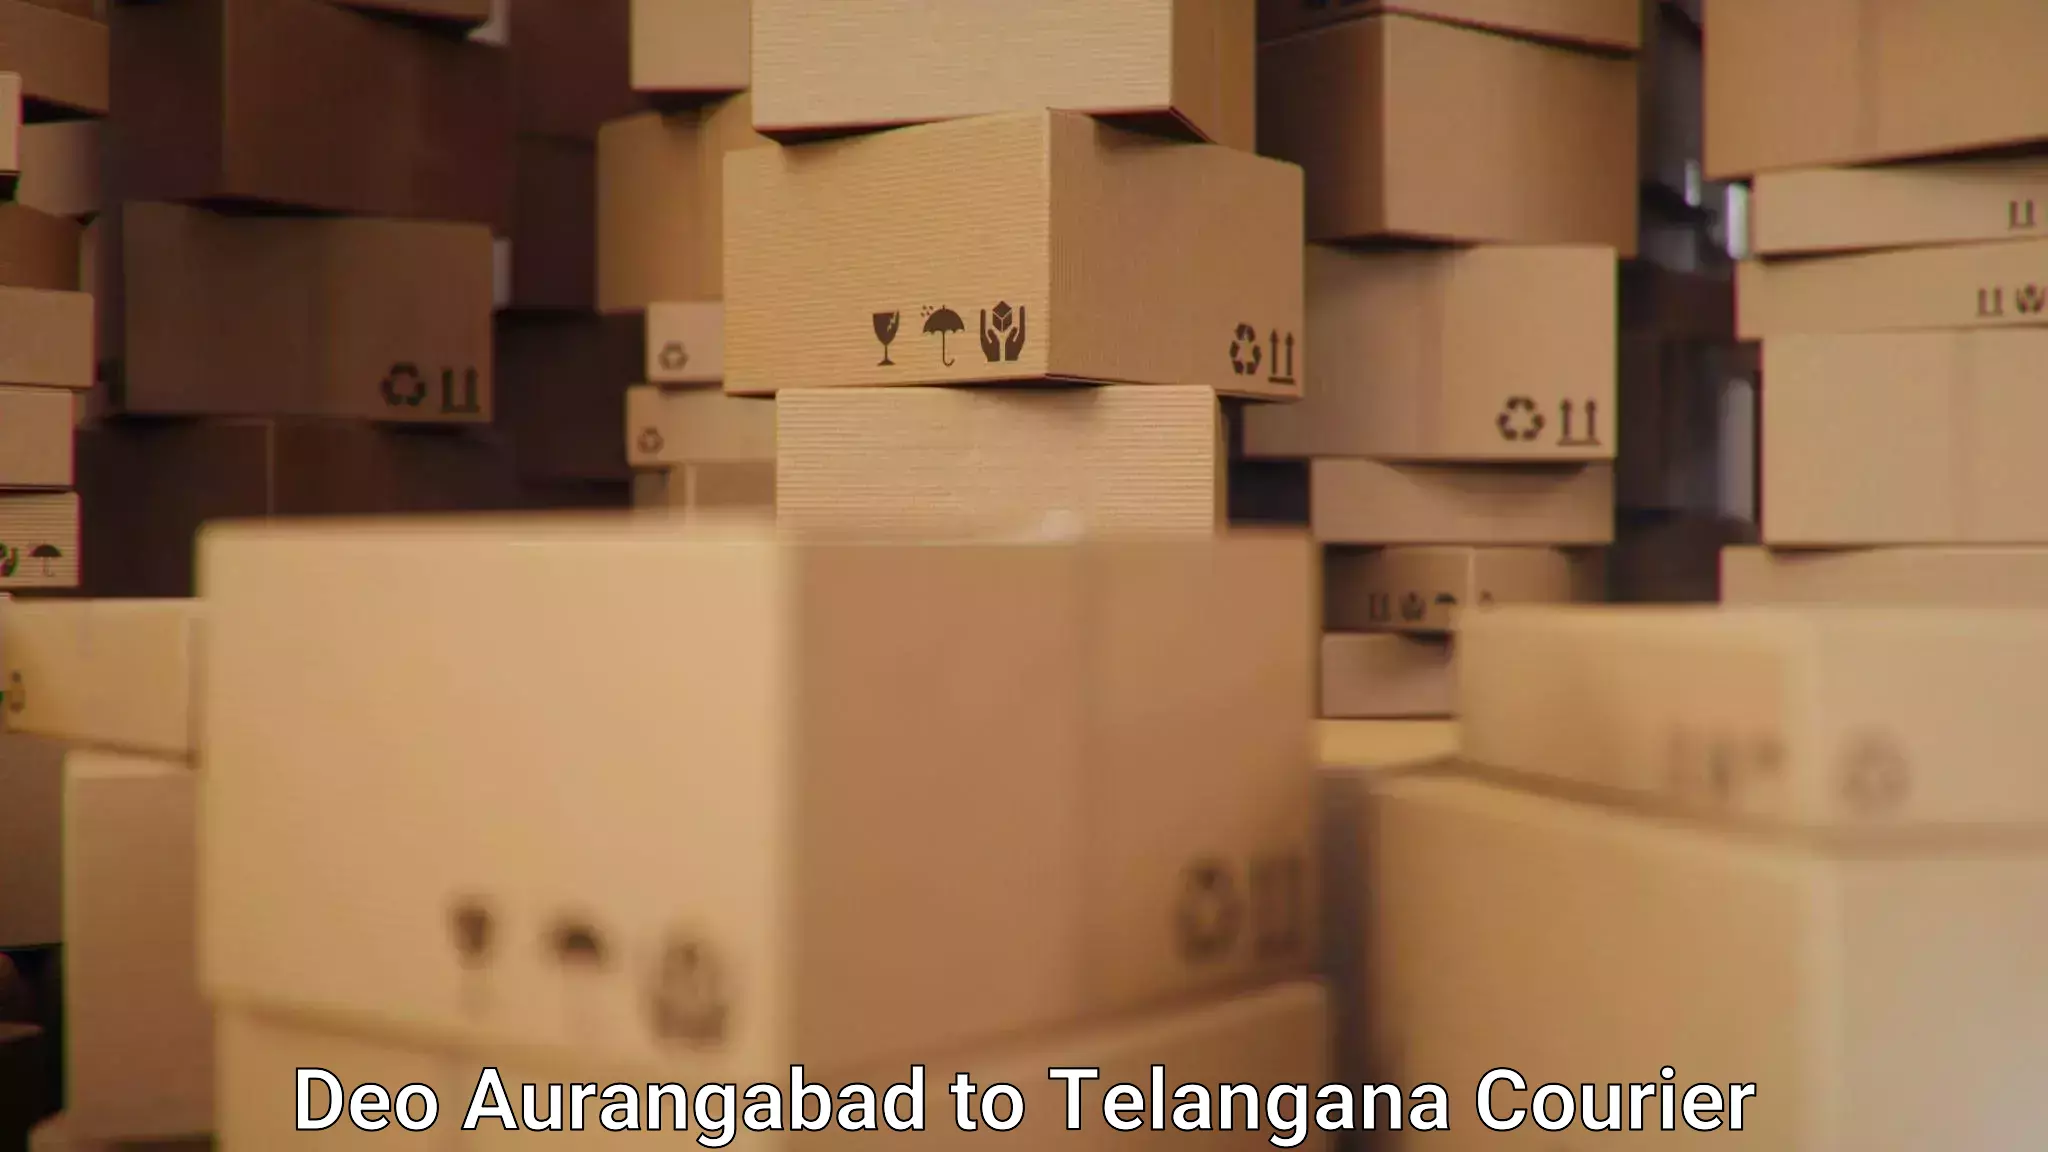 On-call courier service Deo Aurangabad to Cheyyur